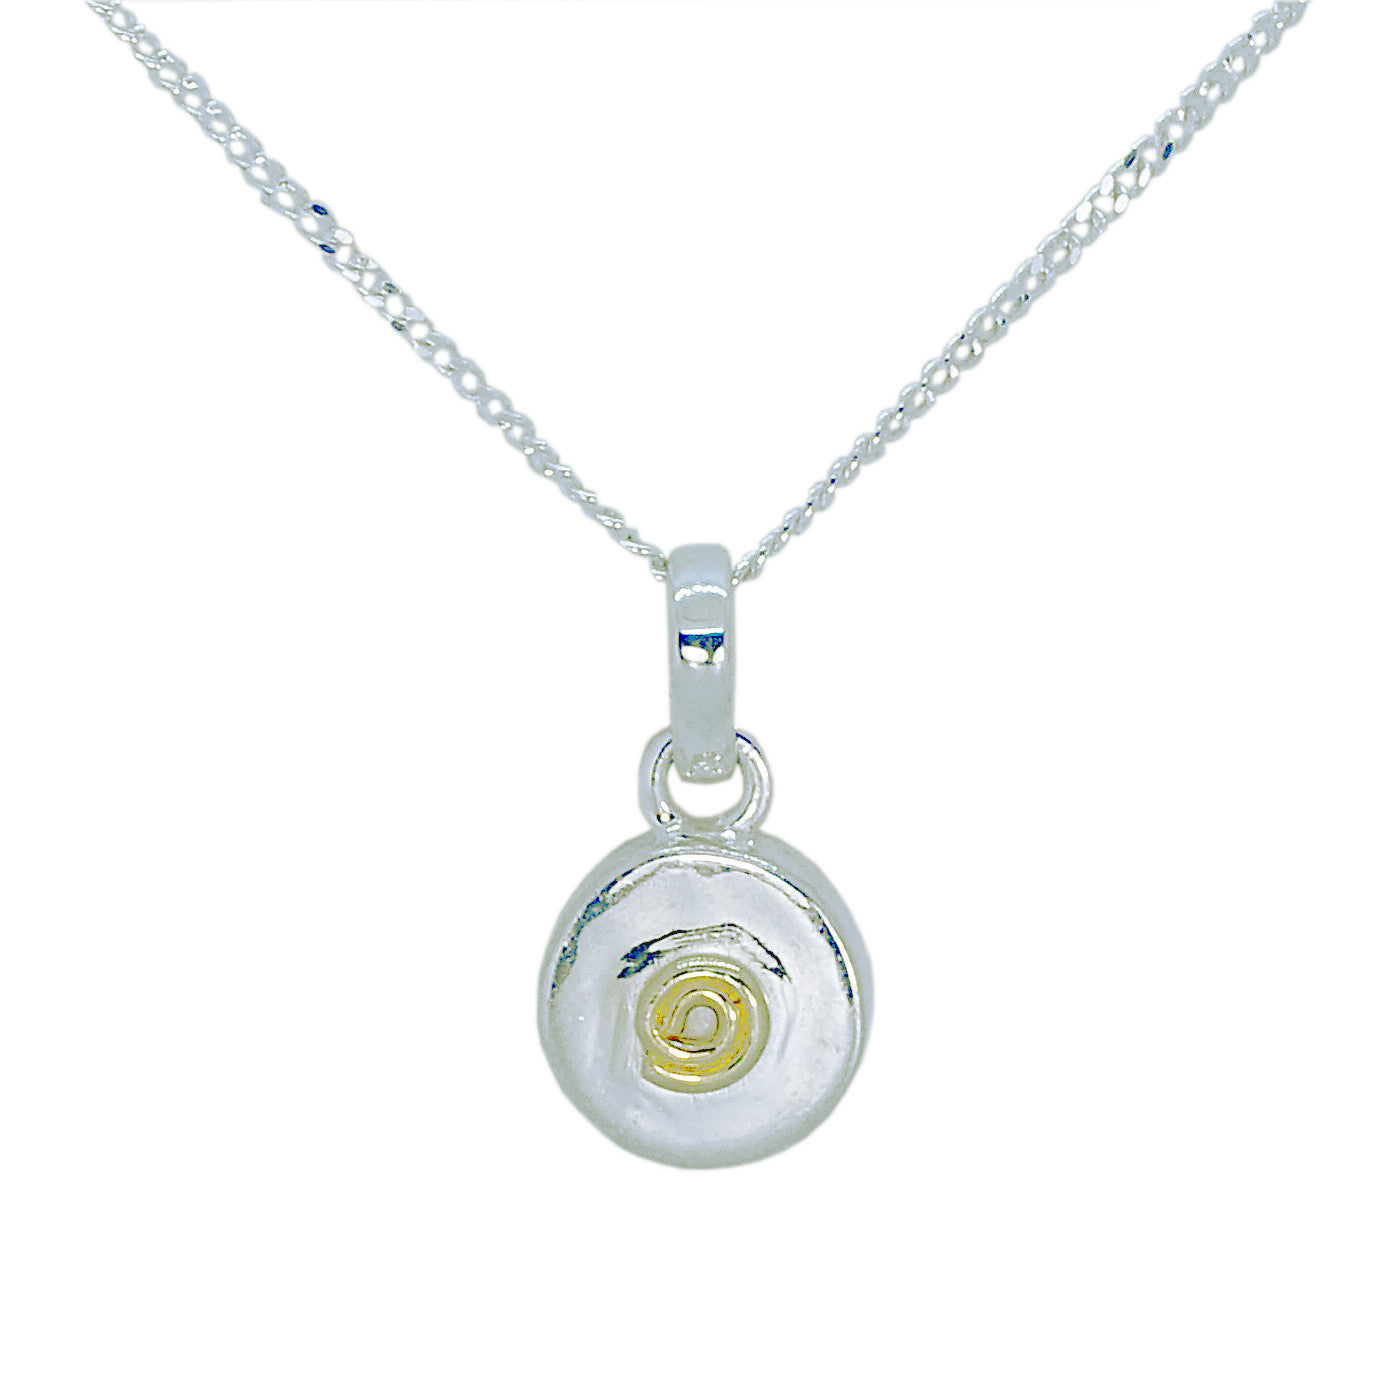 Sterling Silver and Gold Plated Spiral Pendant and Silver Chain